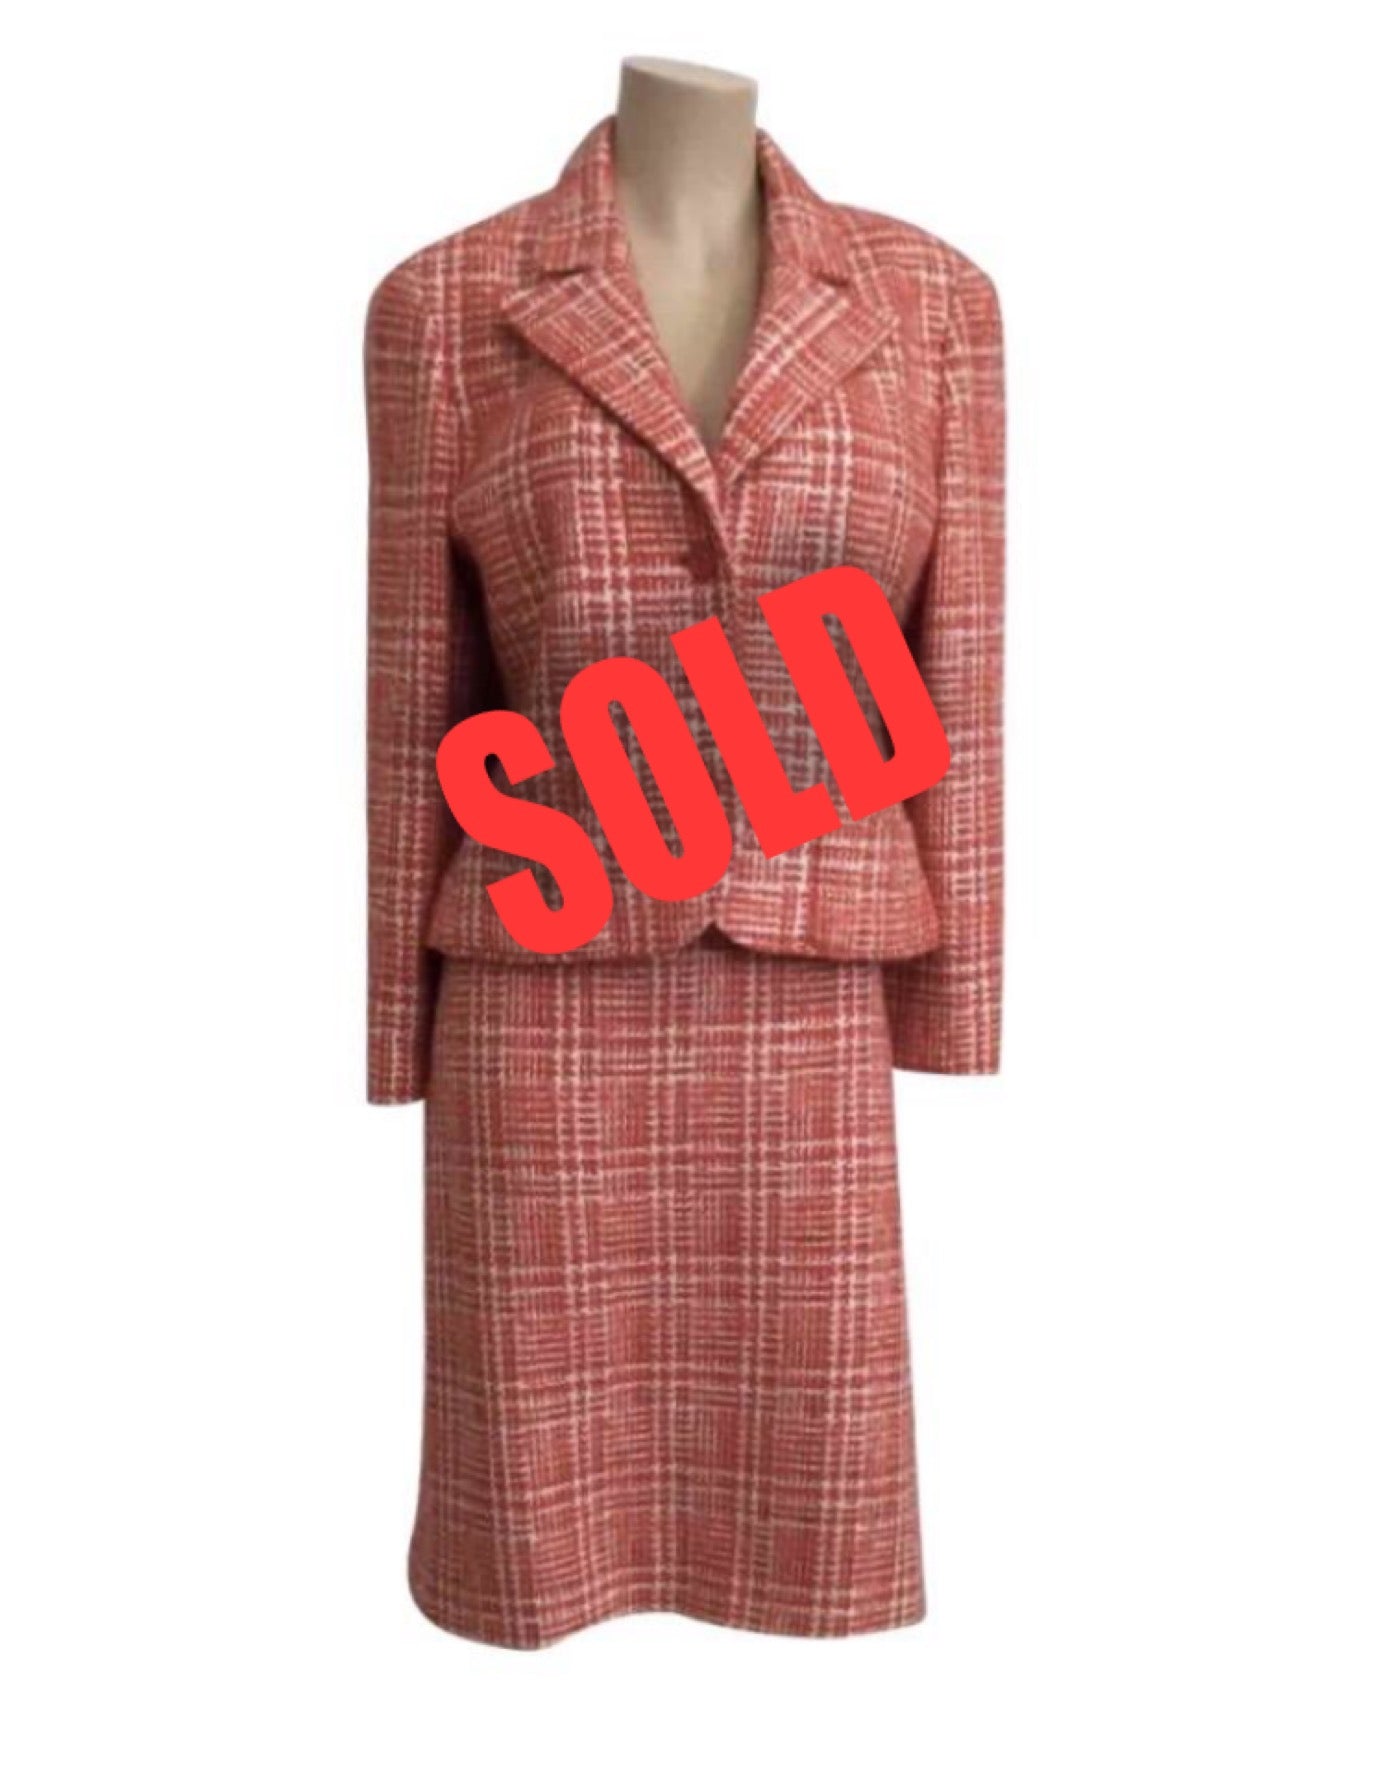 Vintage Chanel Suit Set Plaid Wool Jacket and Matching Skirt FR38 - Mrs  Vintage - Selling Vintage Wedding Lace Dress / Gowns & Accessories from  1920s – 1990s. And many One of